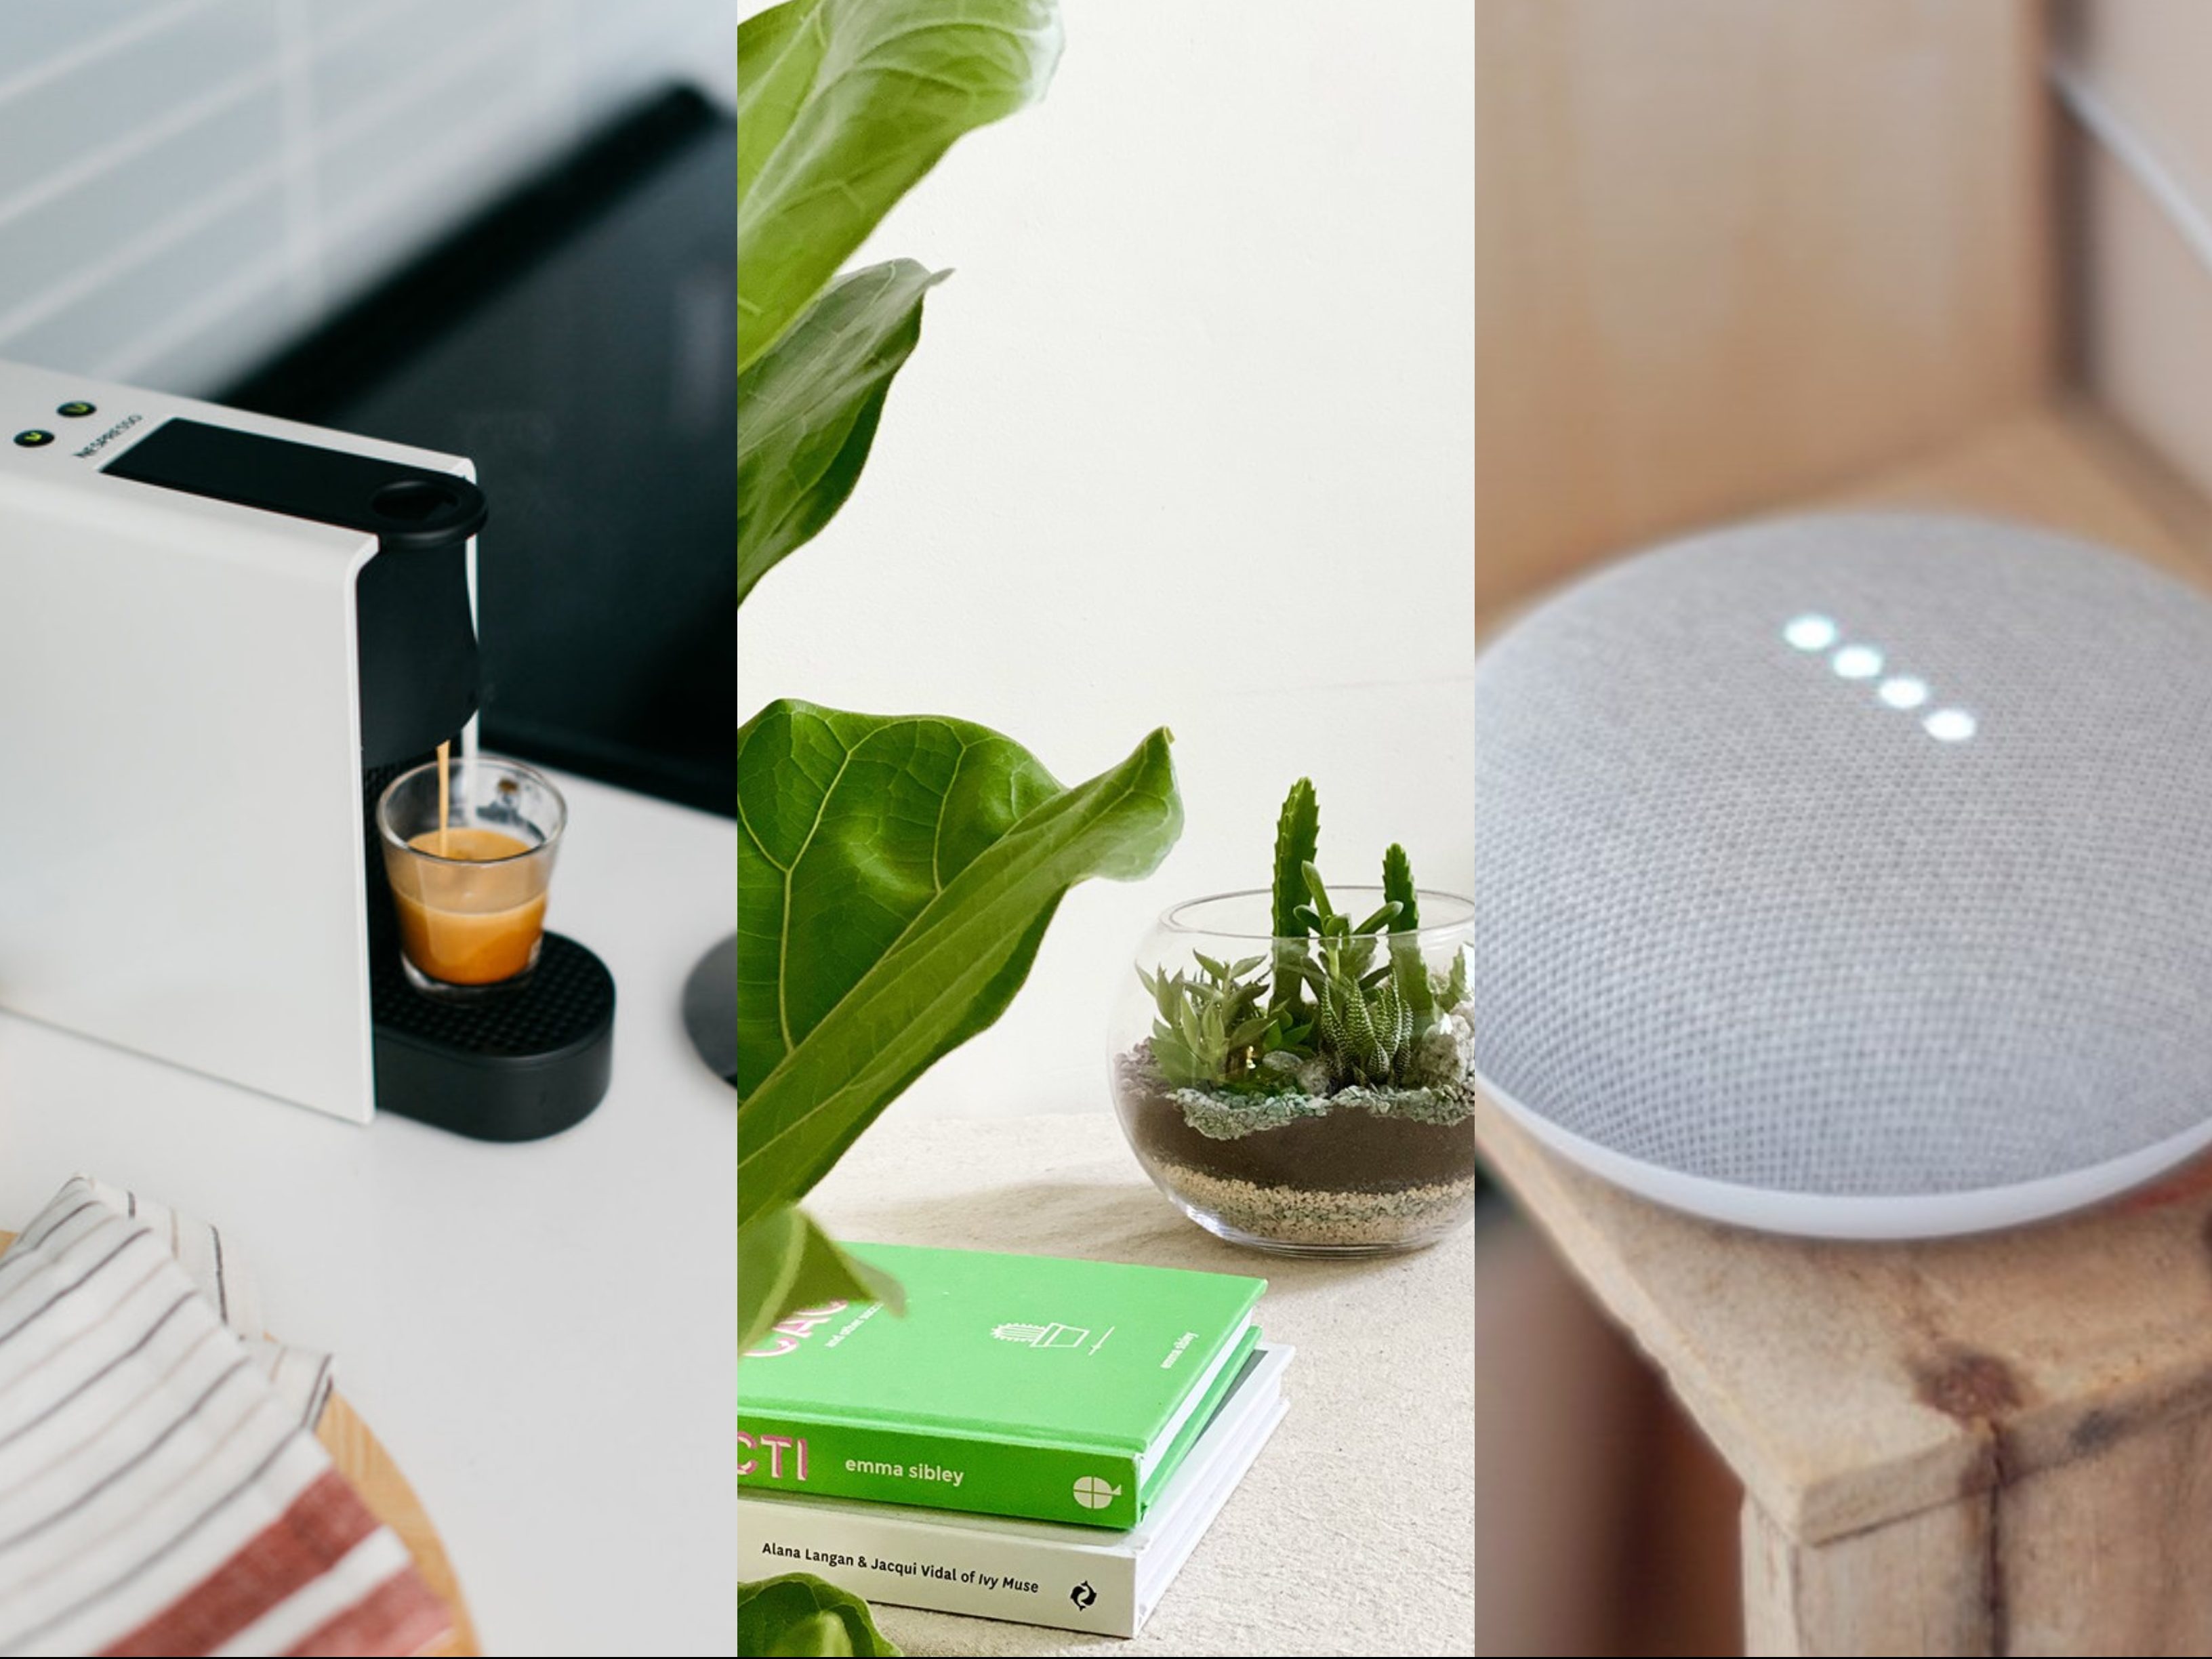 9 Cool Things You Should Get To Level Up Your Home, Office & Car